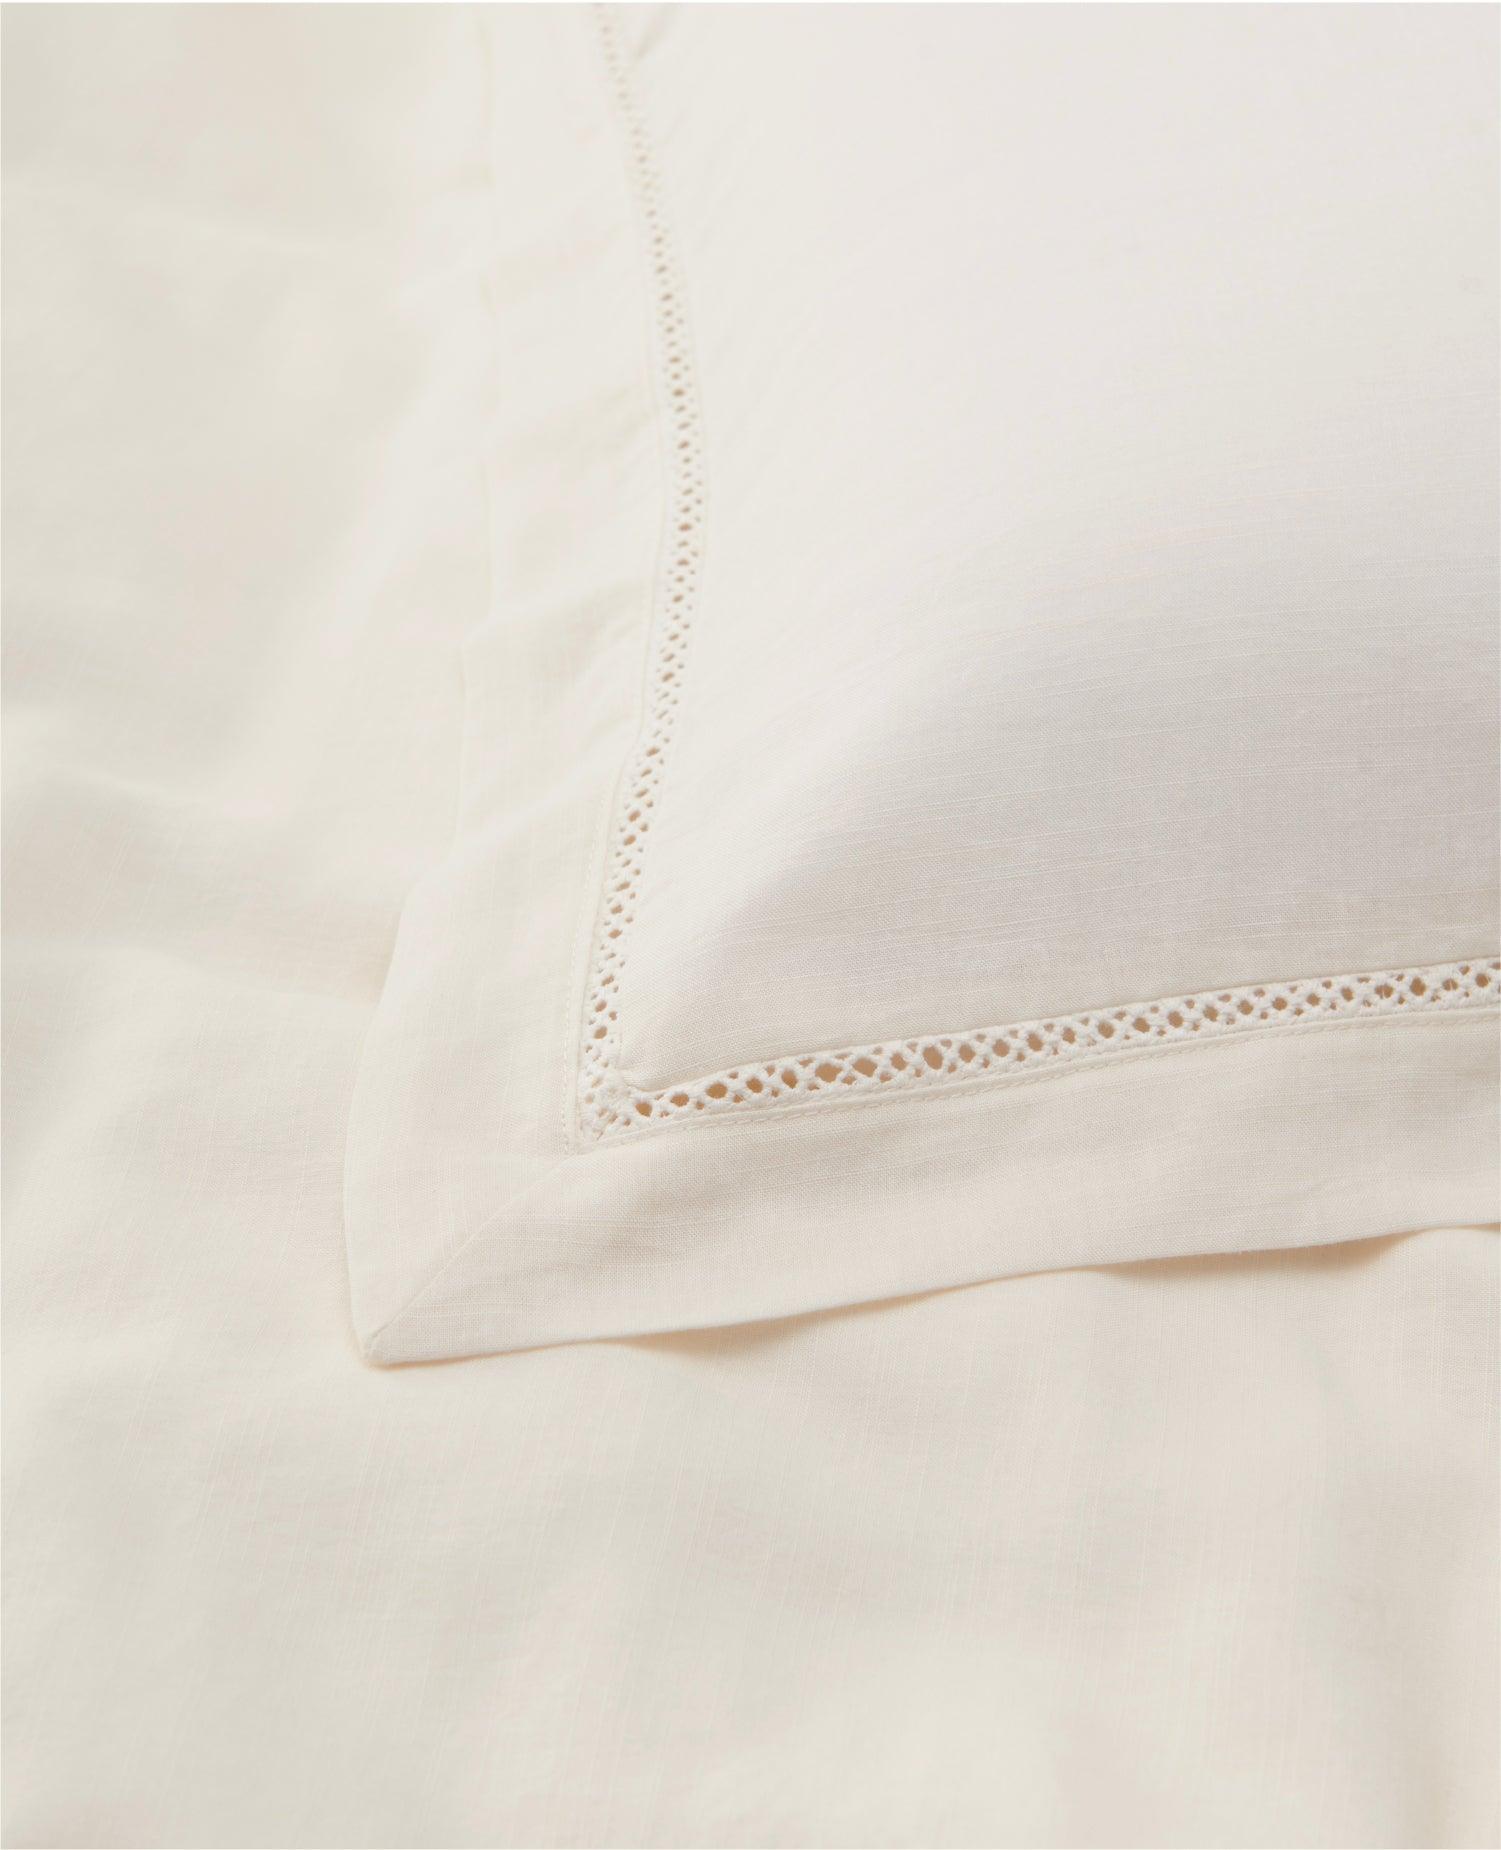 Linen Lyocell Complete Bedding Bundle - Double Stitch By Bedsure